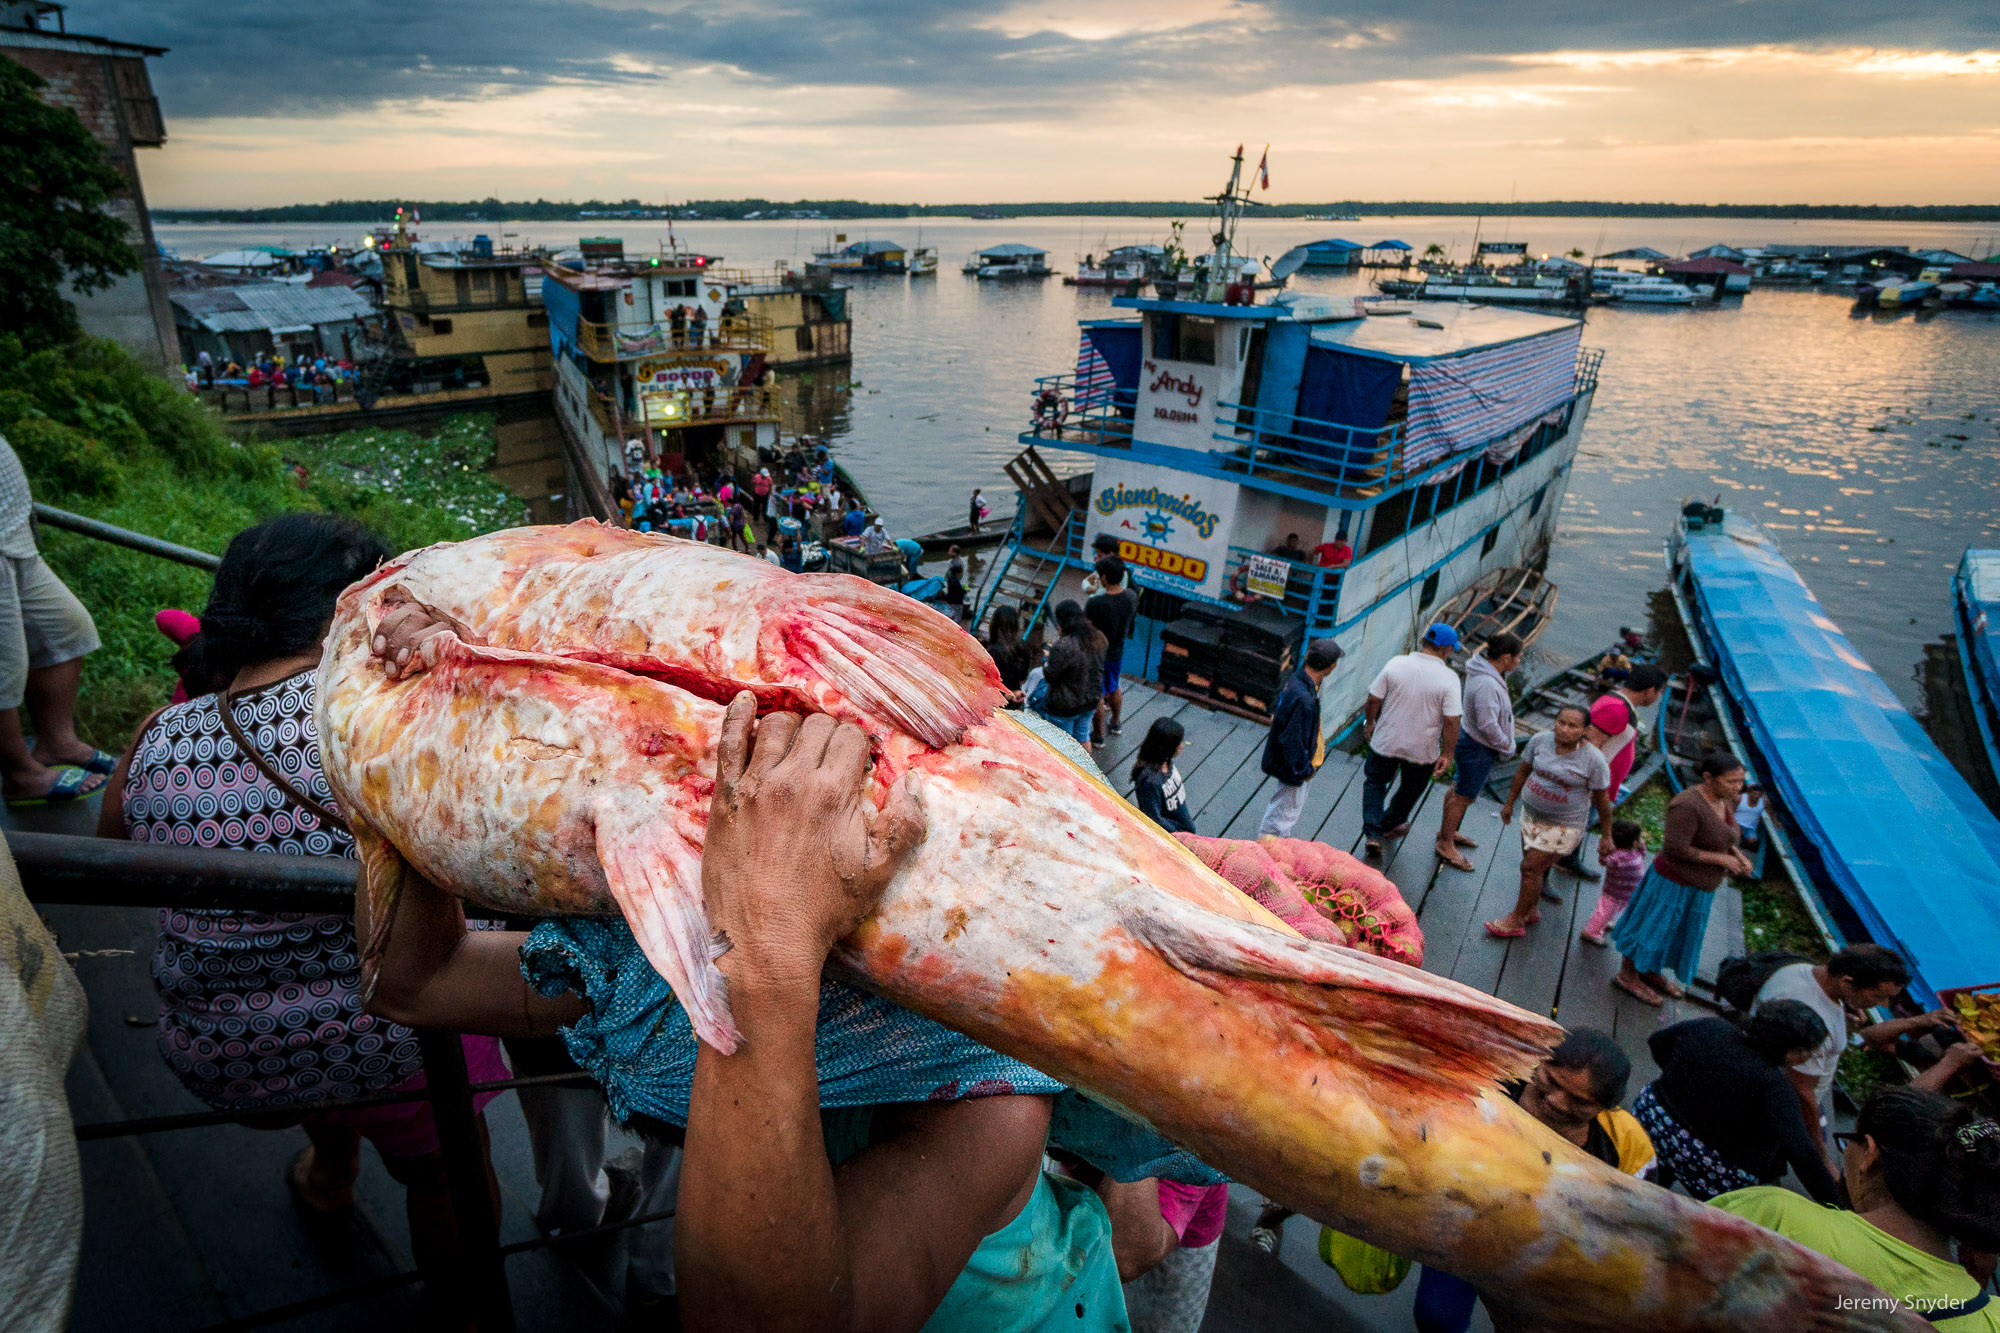 A giant catfish from the fisheries of the Amazon river being carried up to market in Iquitos, Peru